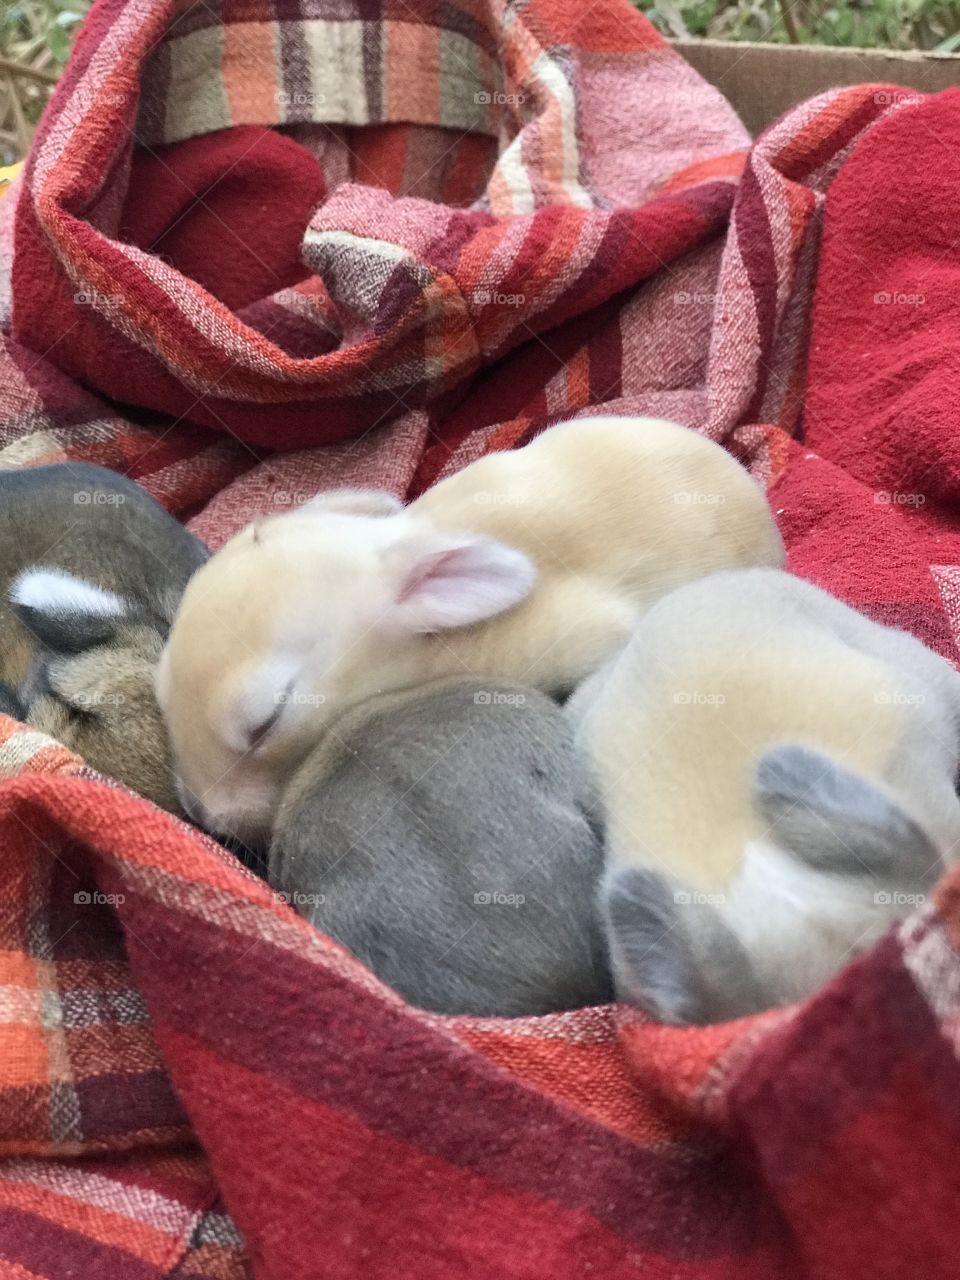 7 day old baby bunnies 